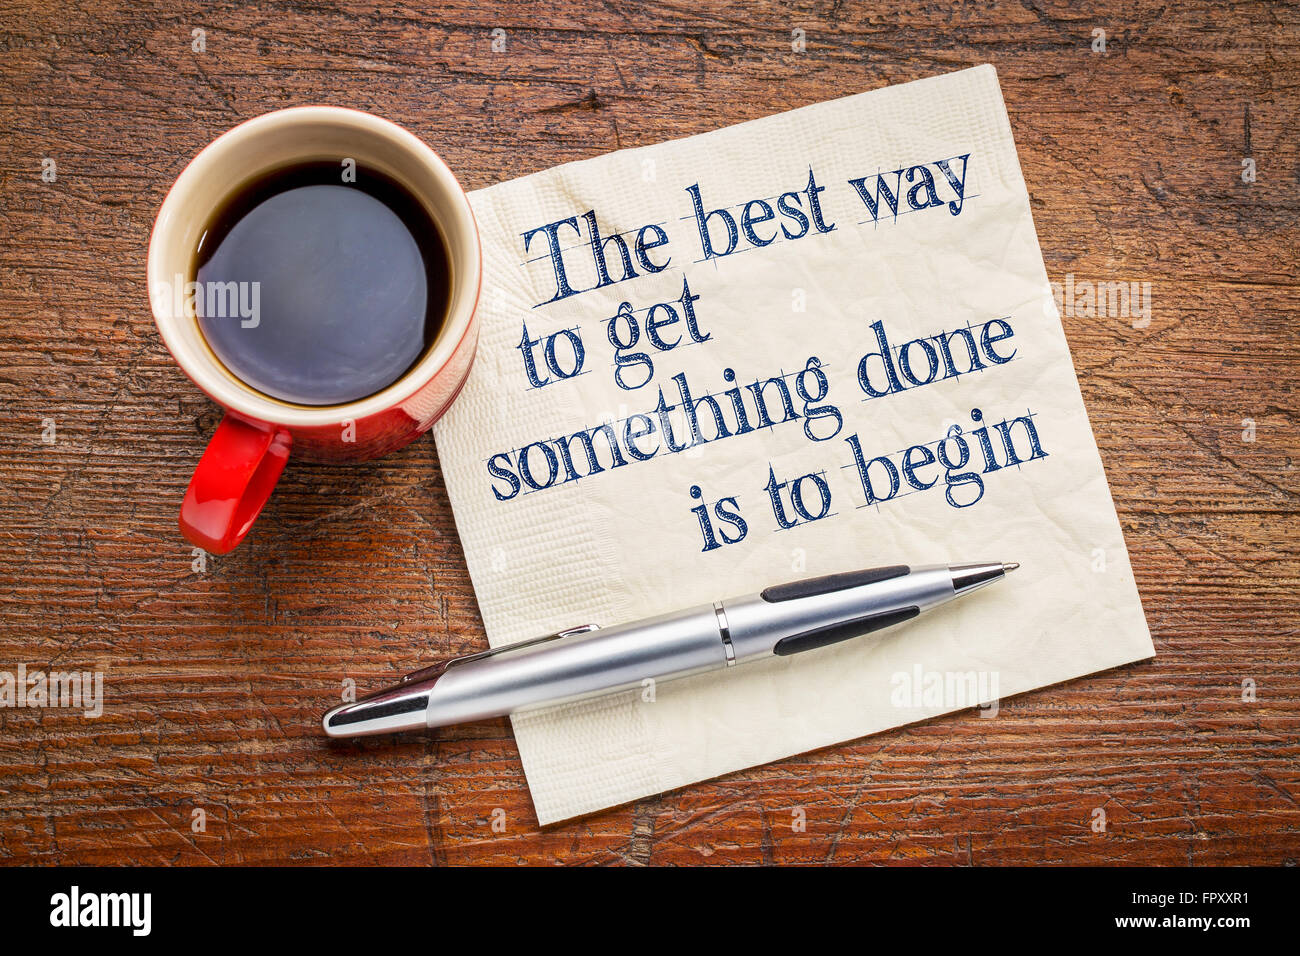 the best way to get something done is to begin - inspirational phrase on a napkin with cup of coffee Stock Photo